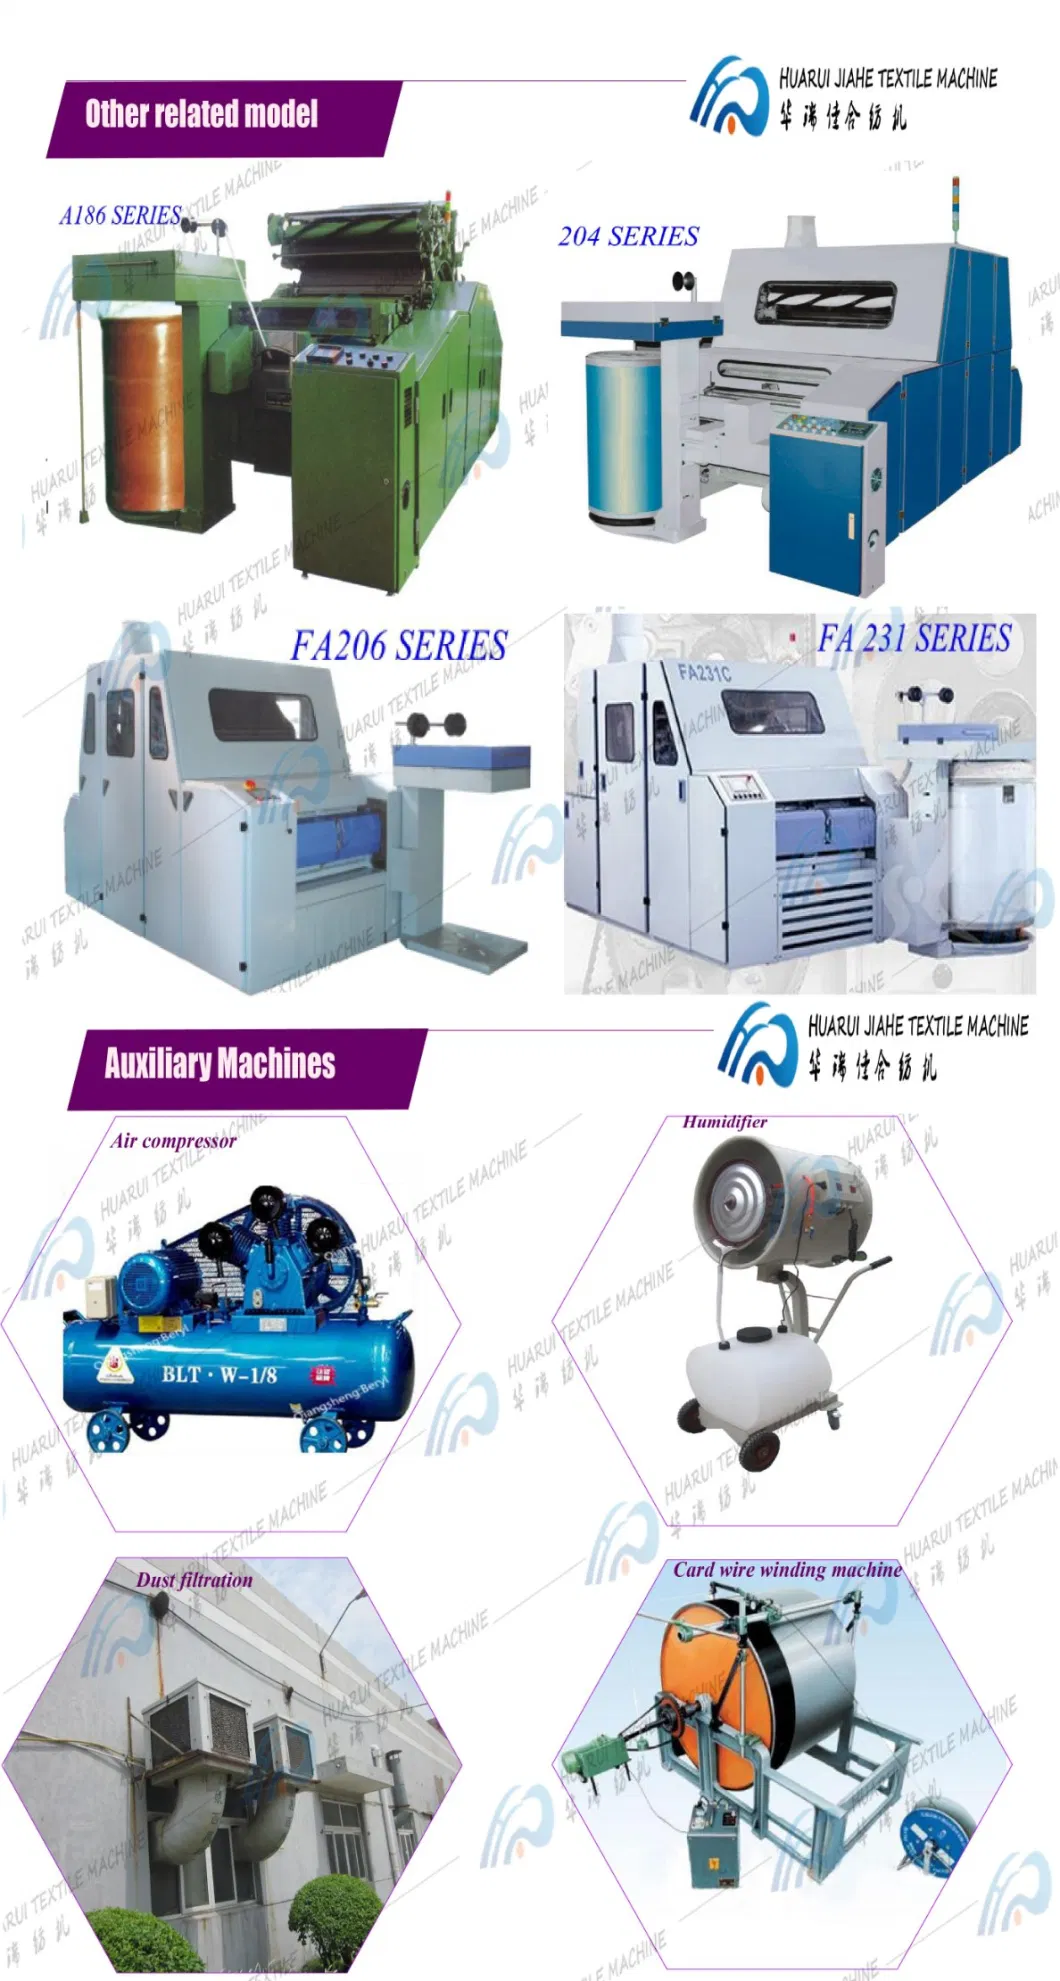 Medium Size Fabric Dyeing Equipment, Lace Dyeing, High Temp Prototype, Zipper Dyeing Small Prototype Textile Cord Dyeing Machine Knitting Dyeing Equipment